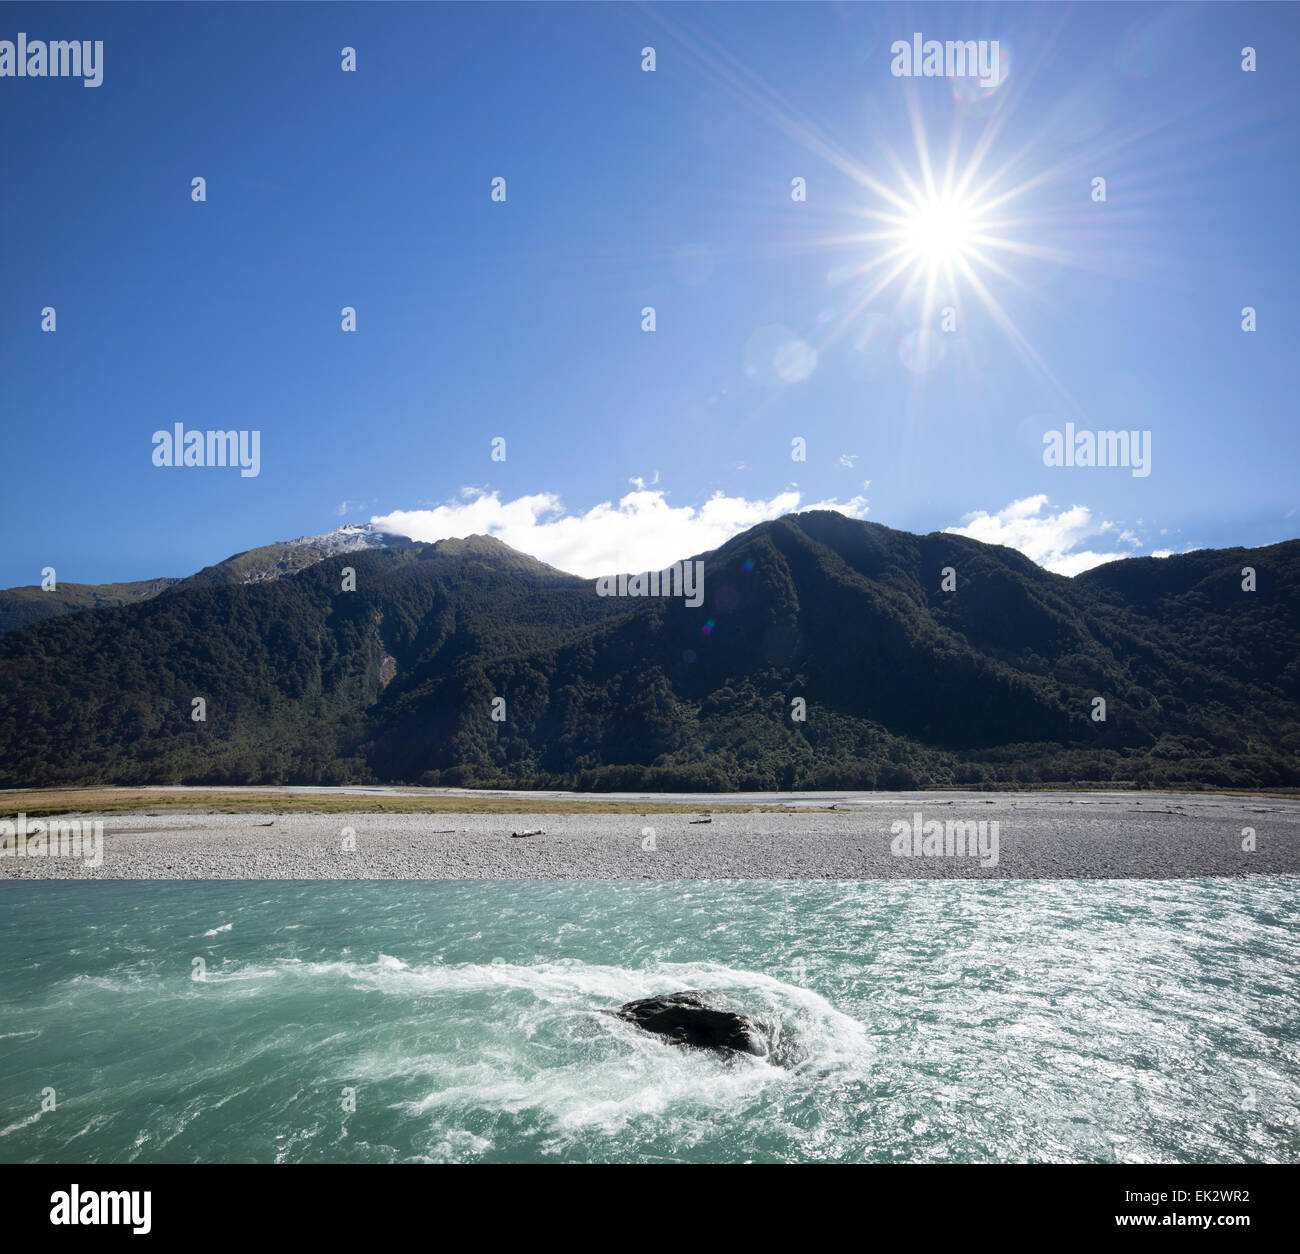 Clutha River flowing out of Lake Wanaka, south island, New Zealand. Stock Photo